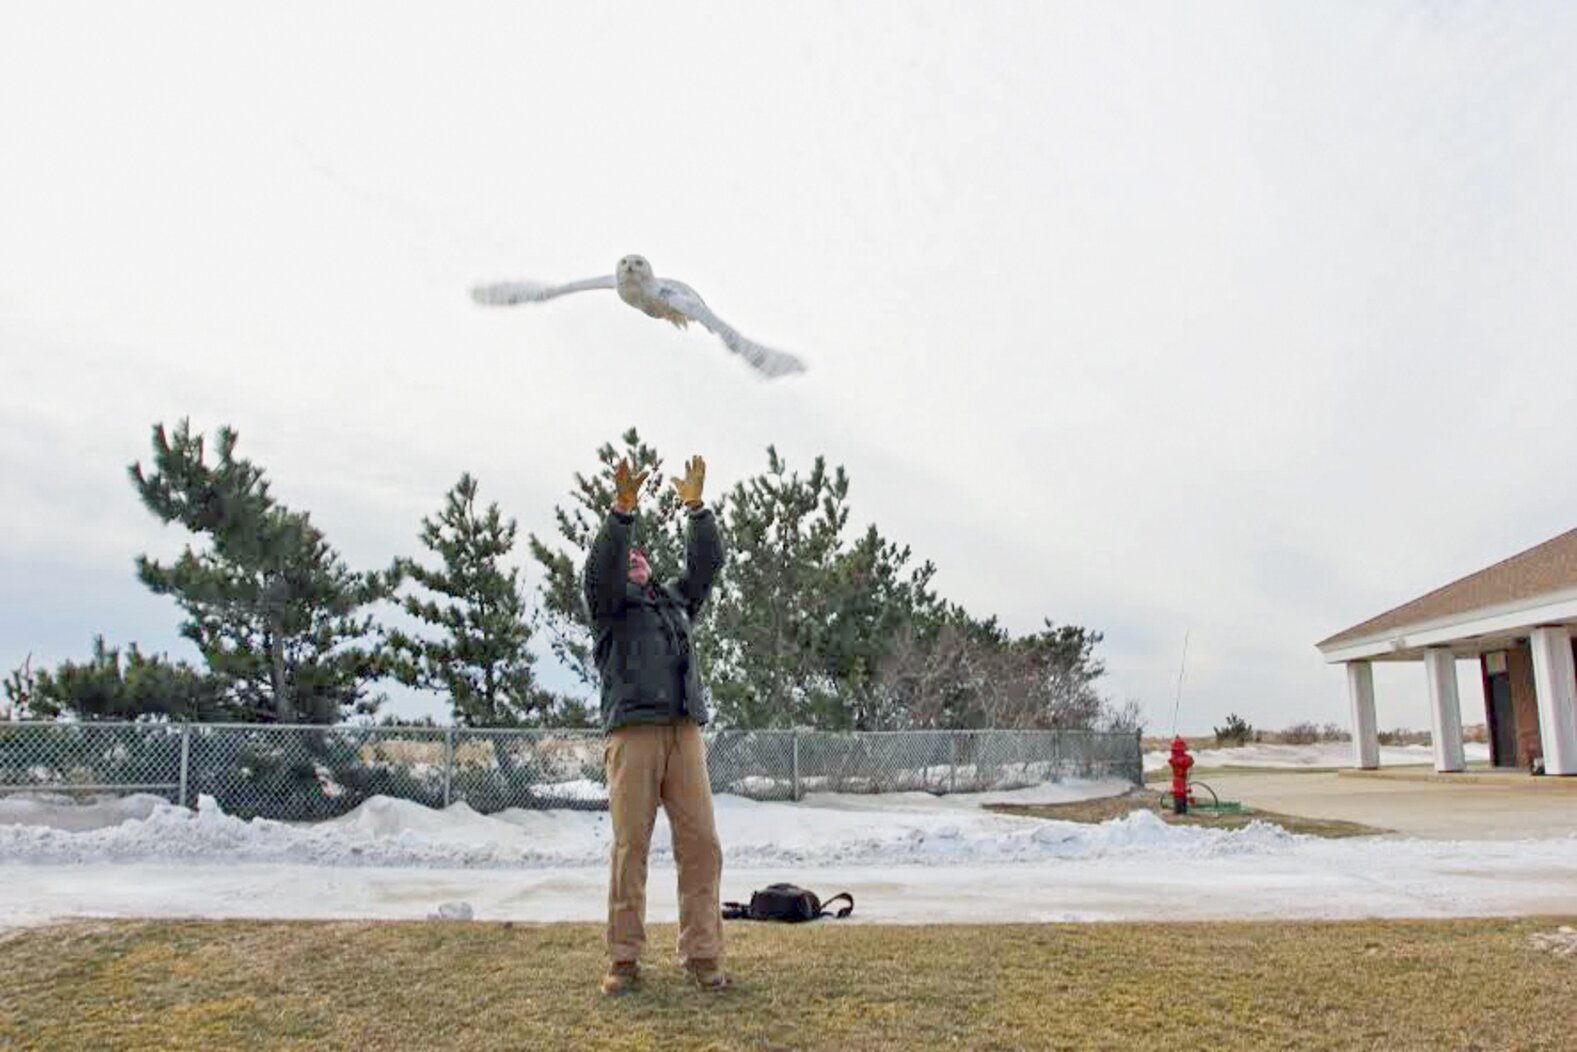 A banded Snowy Owl is released, January 2014. Photo: NYC Bird Alliance/Port Authority of NY & NJ